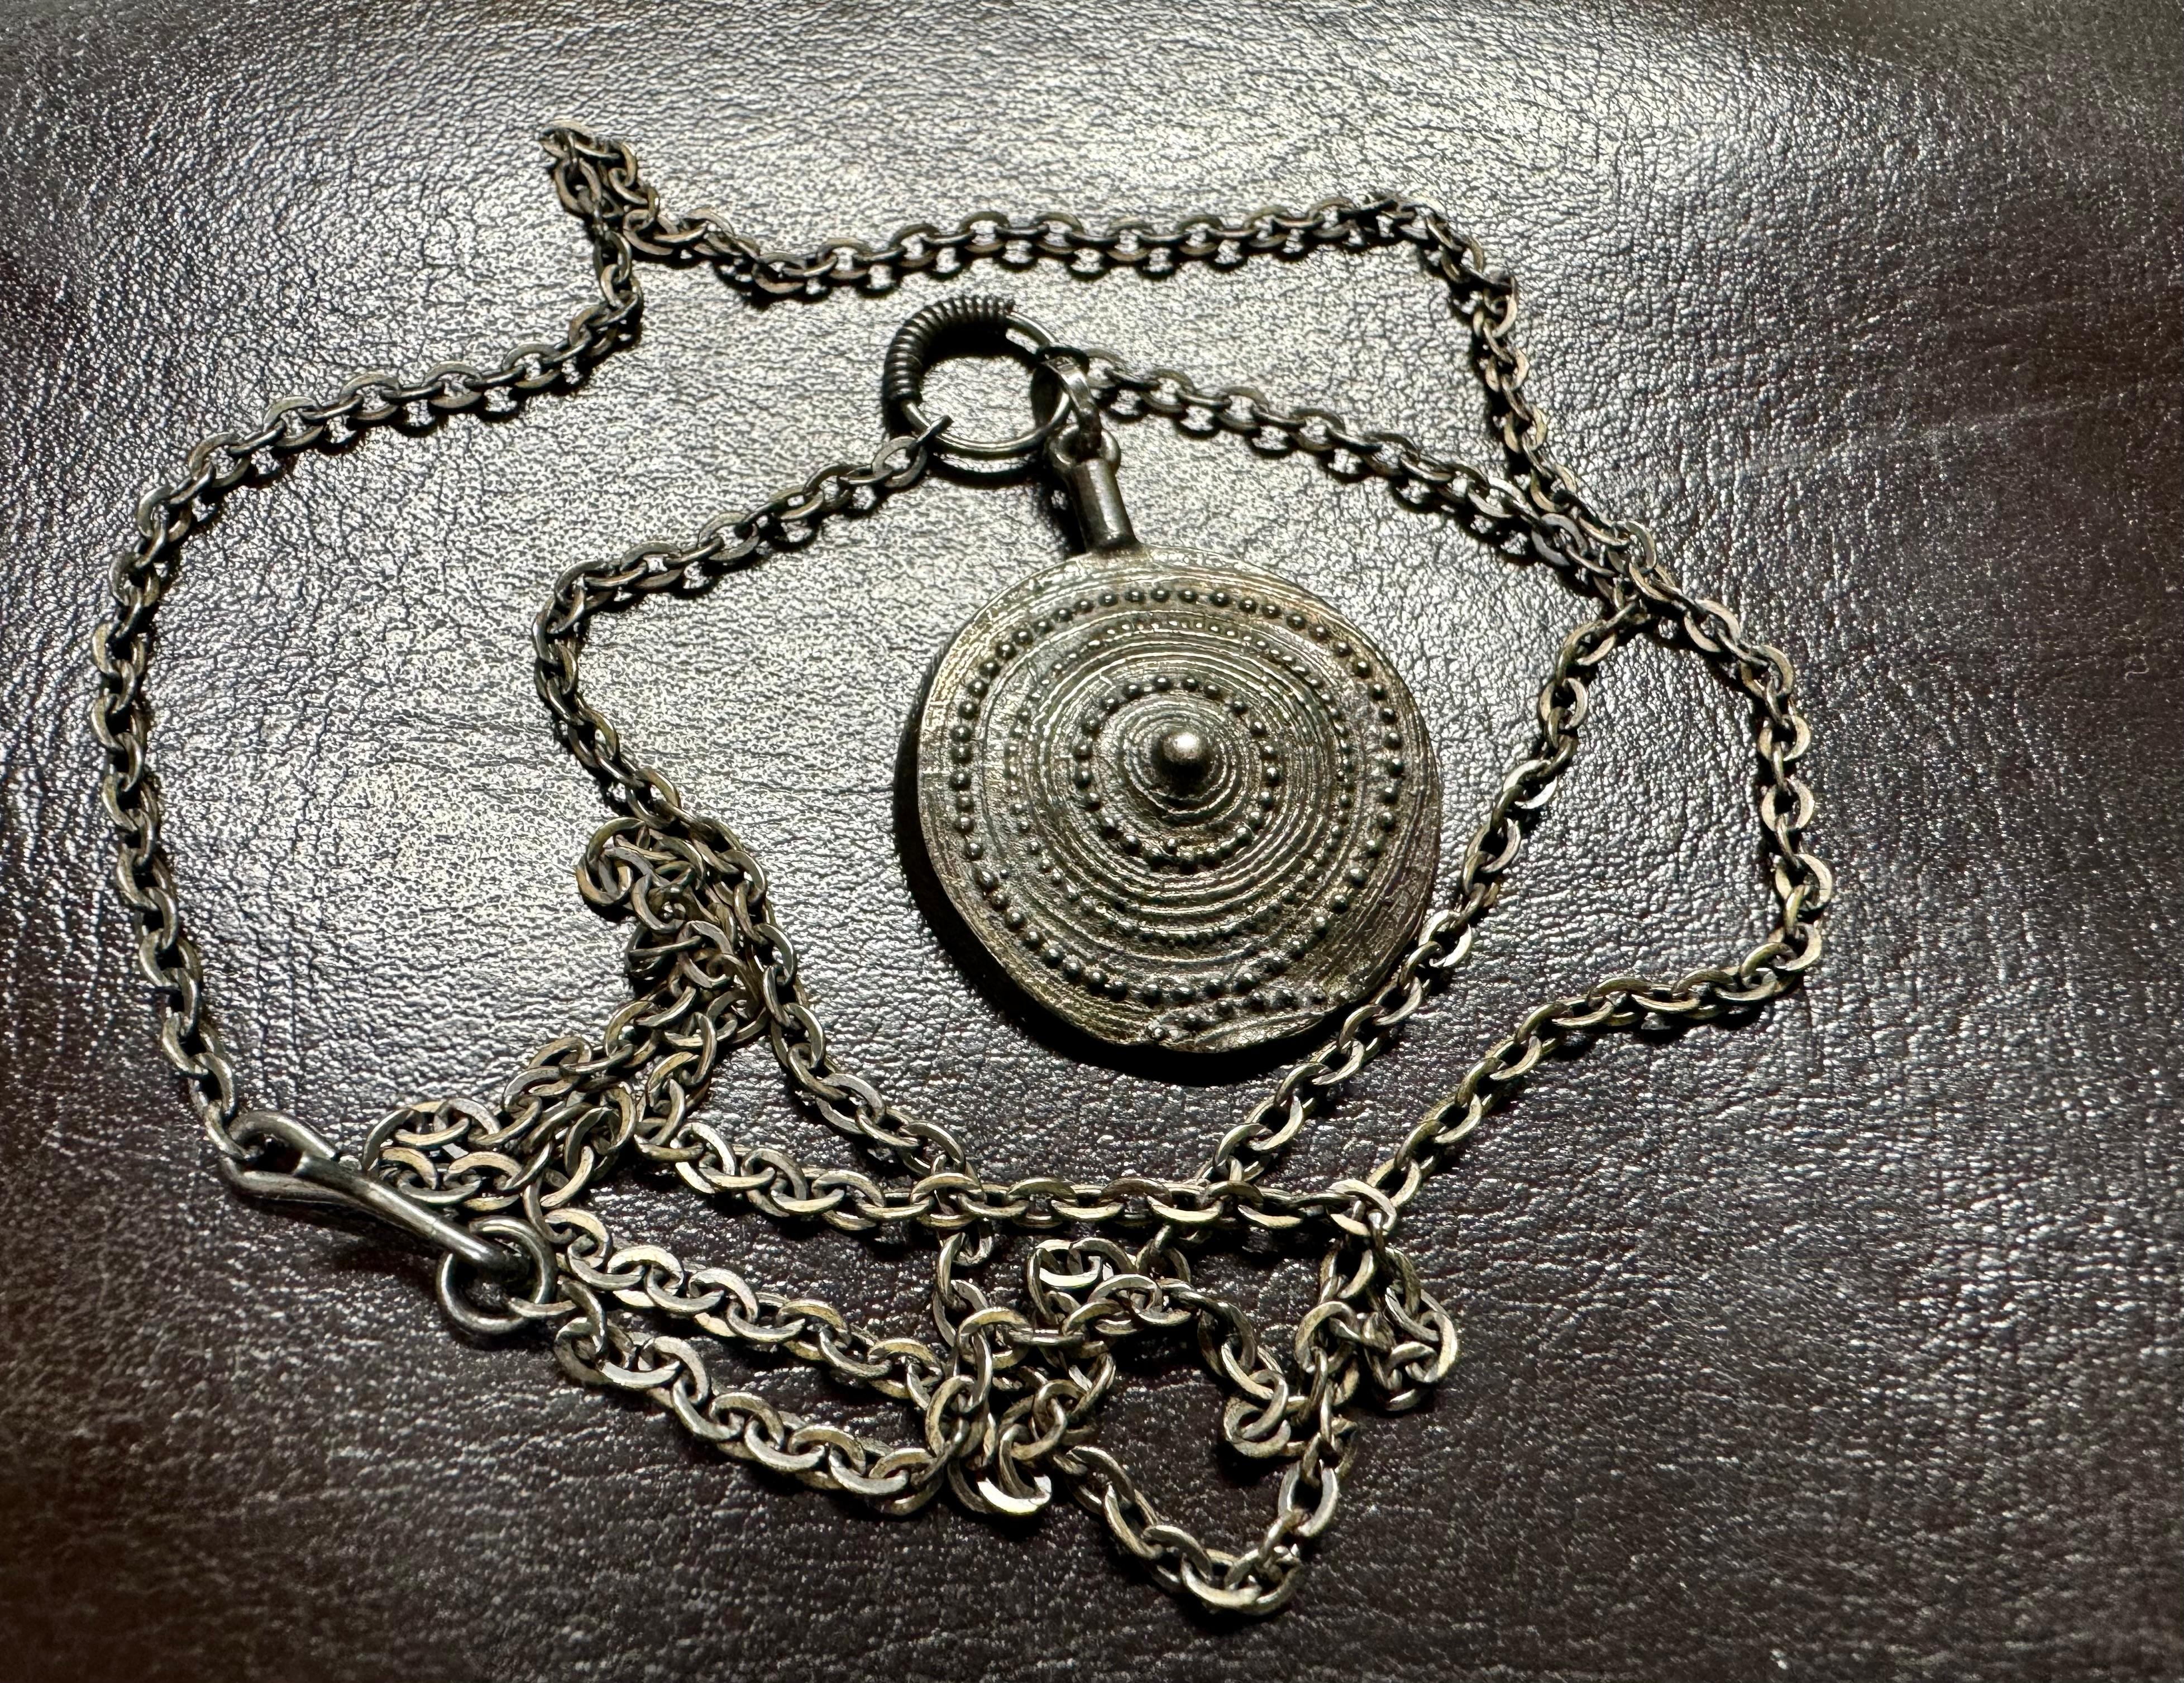 Silver Jorma Laine Turun Hopea 1973 Abstract Necklace
Chain lenght 62cm
The silver has darkened.
I have not cleaned or polished.
I think it's really great when darkened.
Easy to clean if you want.

Jorma Laine (1930-2002) was a Finnish jewelry